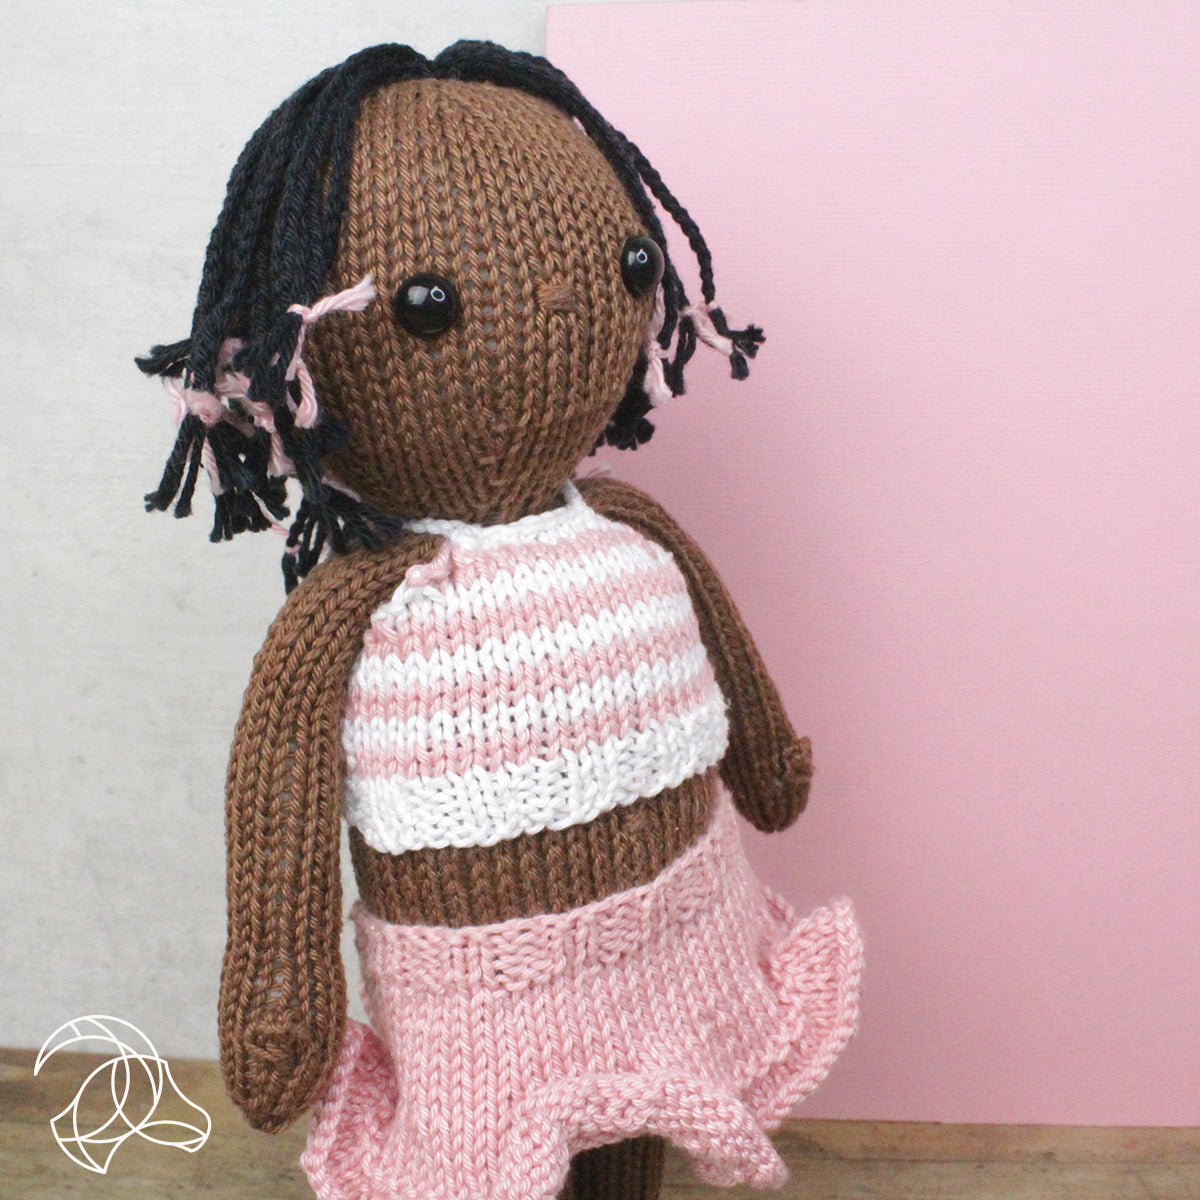 Meet May! A Little Girl Dressed in Pink - Dolly Knitting Kit